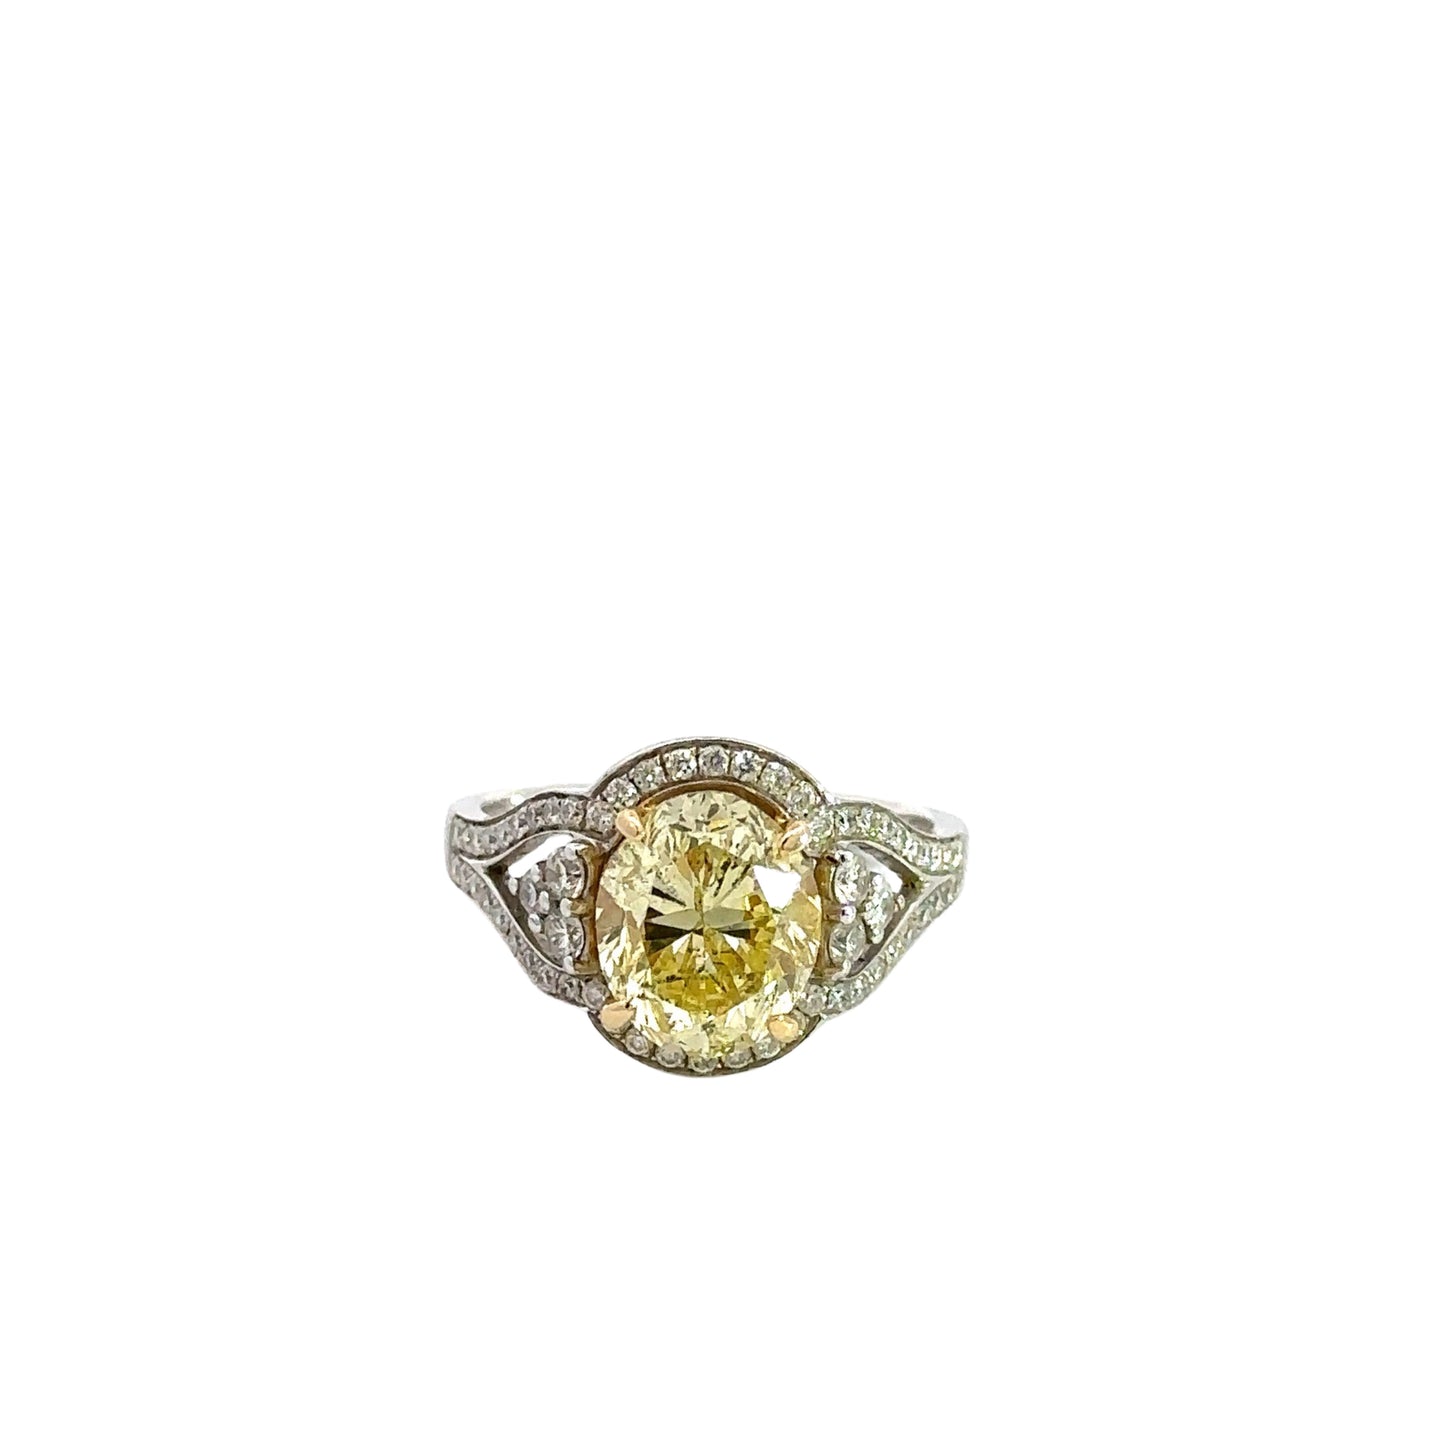 White gold ring with yellow oval diamond in center and small round diamonds around it